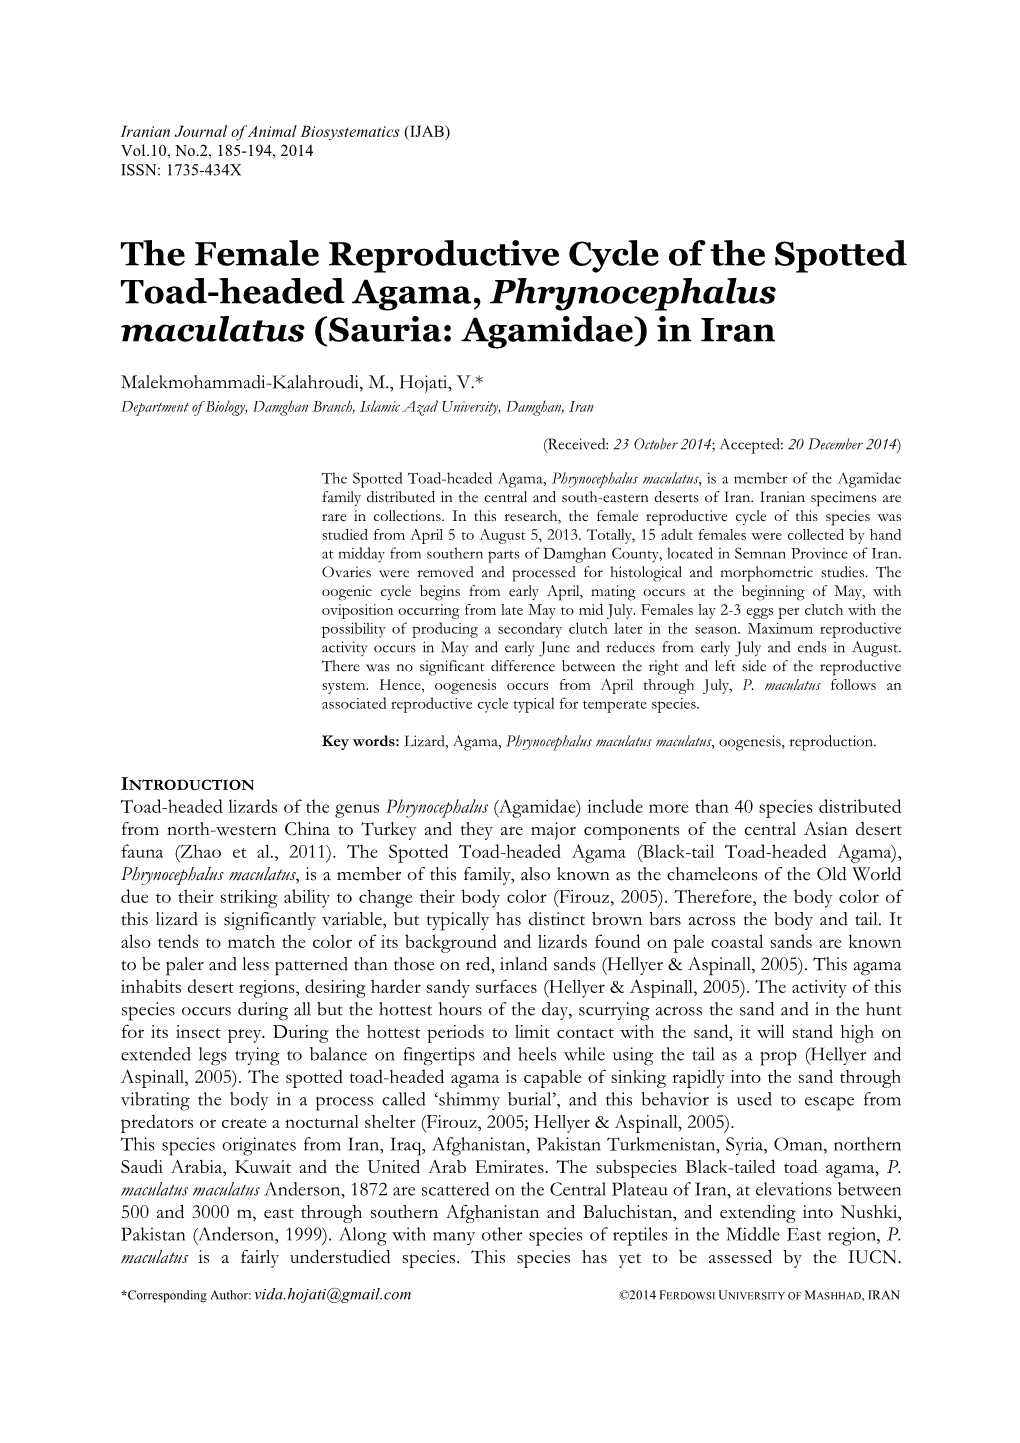 The Female Reproductive Cycle of the Spotted Toad-Headed Agama, Phrynocephalus Maculatus (Sauria: Agamidae) in Iran